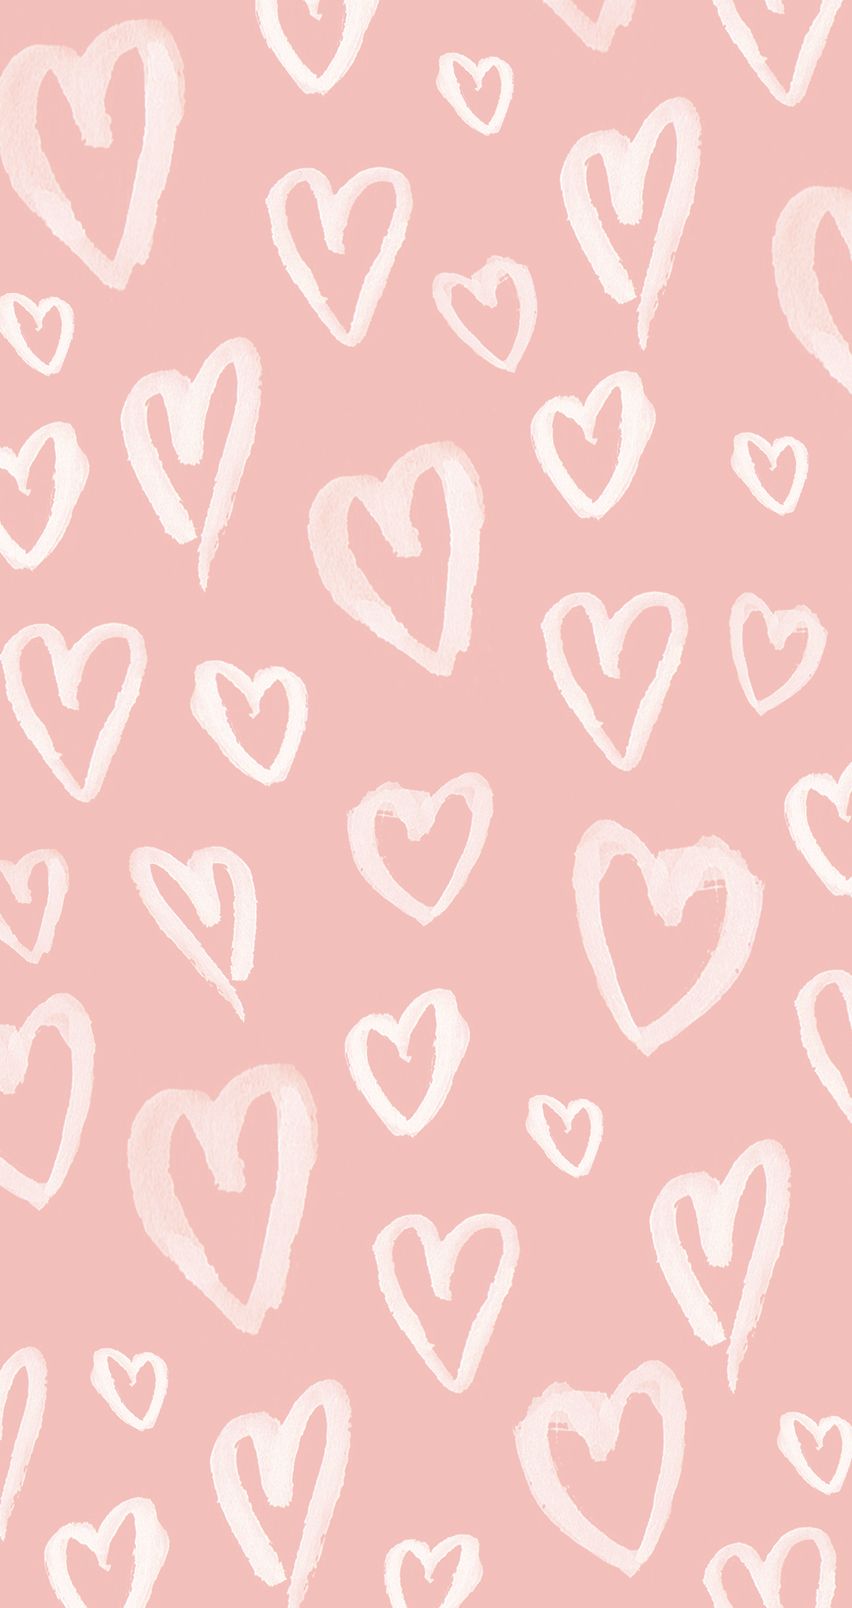 Pink, Wallpaper, And Background Image - Instagram Story Icons One By One - HD Wallpaper 